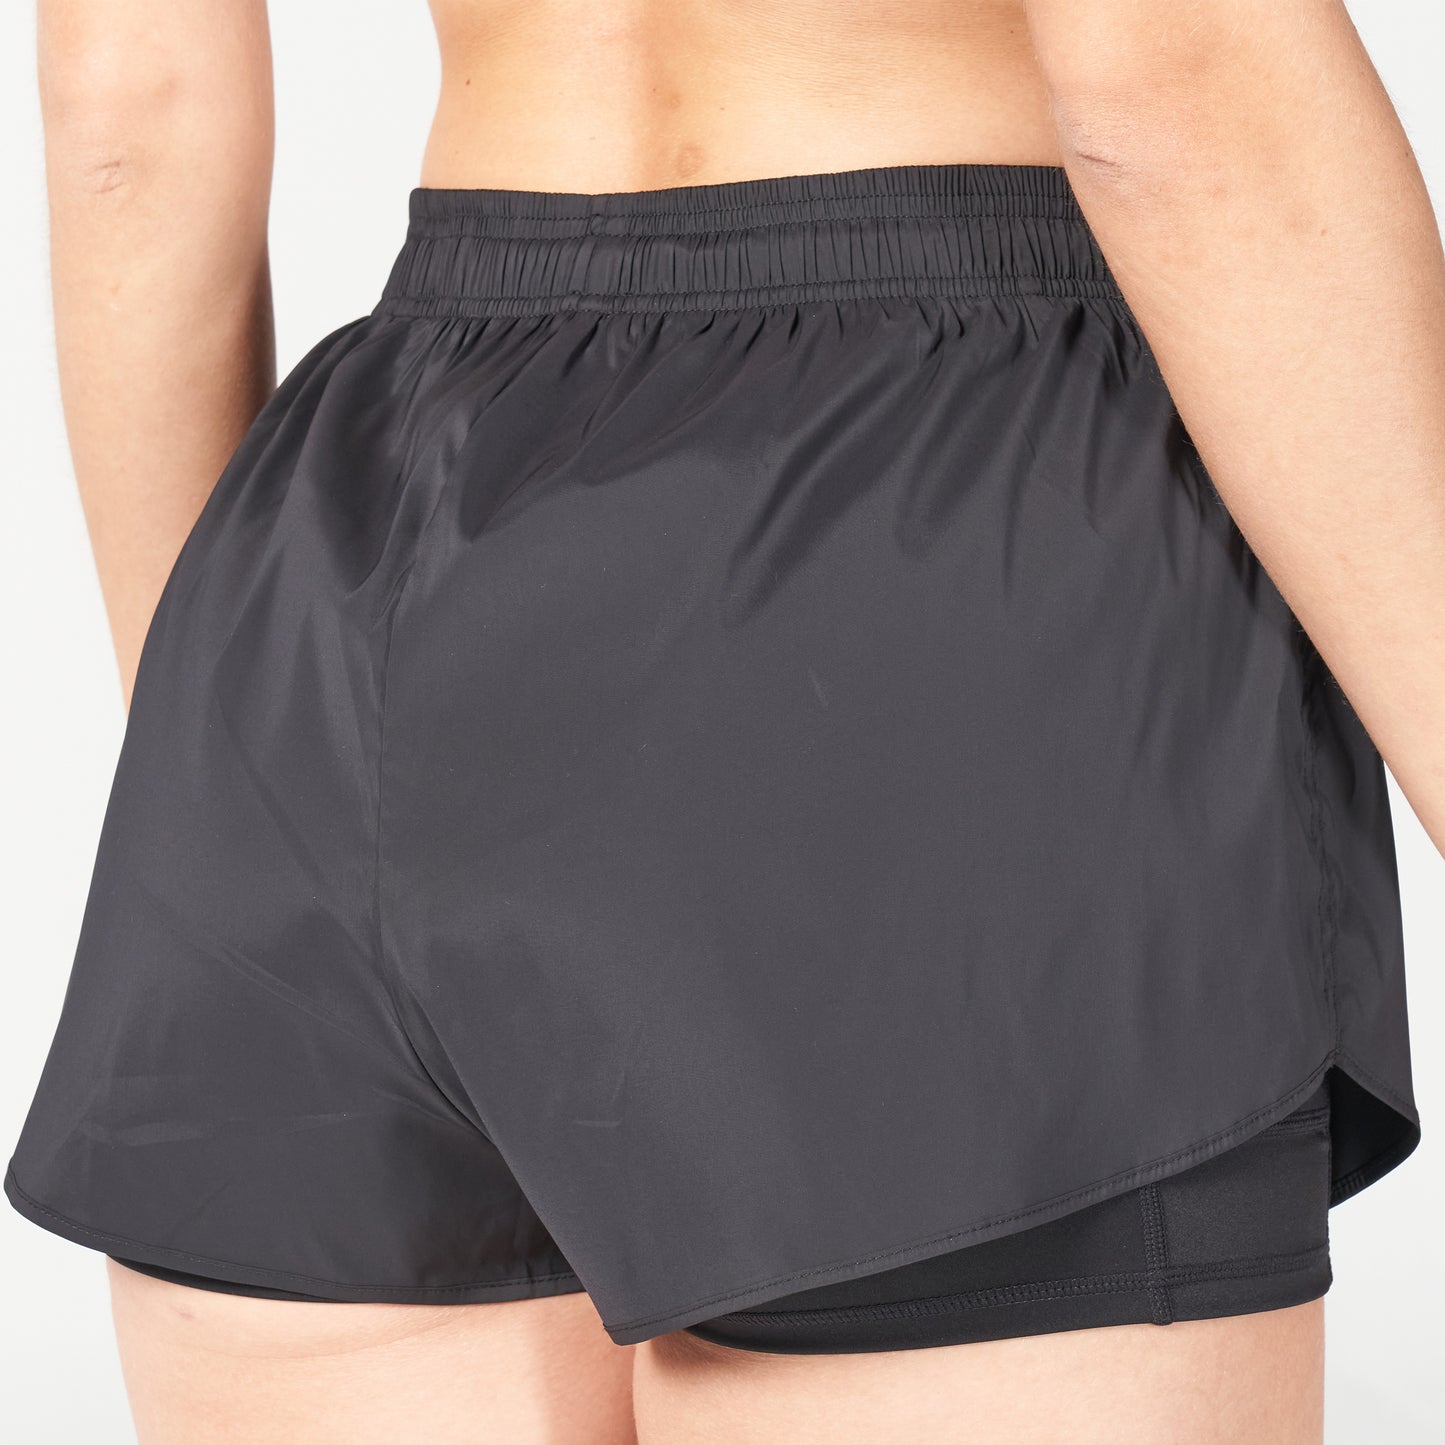 squatwolf-workout-clothes-glaze-2-in-1-shorts-black-gym-shorts-for-women